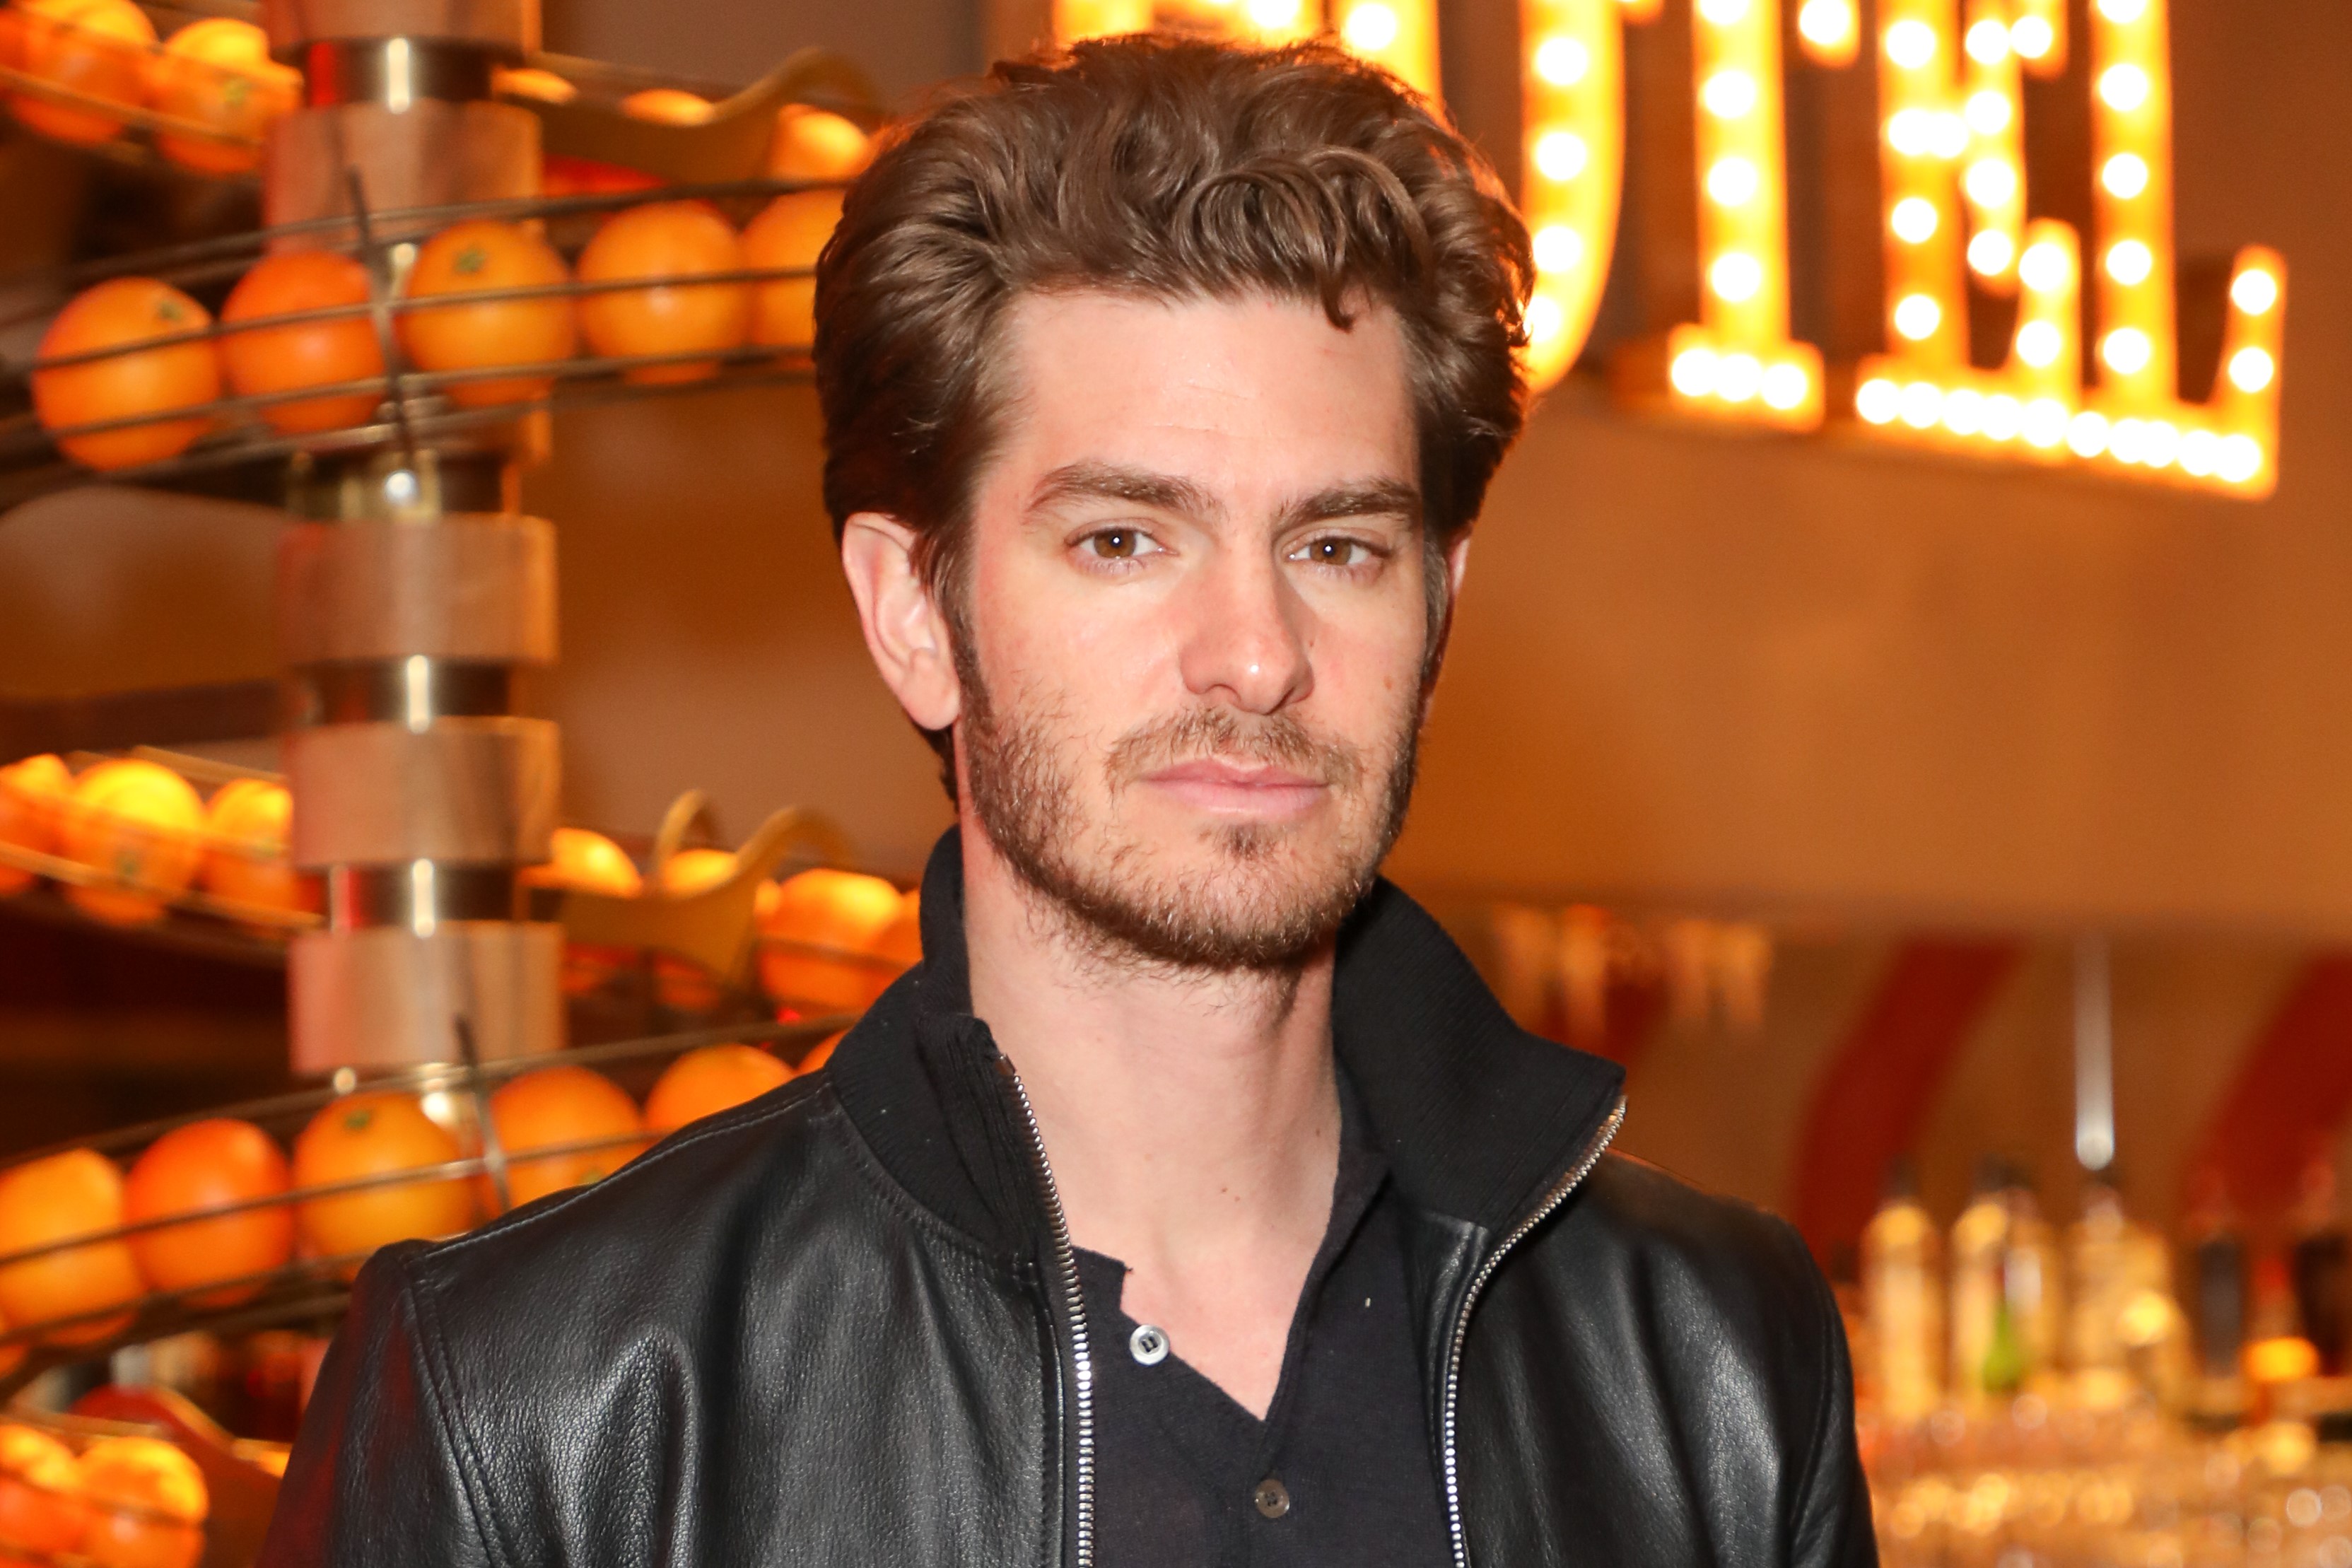 'Spider-Man: No Way Home' star Andrew Garfield wears a black leather jacket over a black shirt.